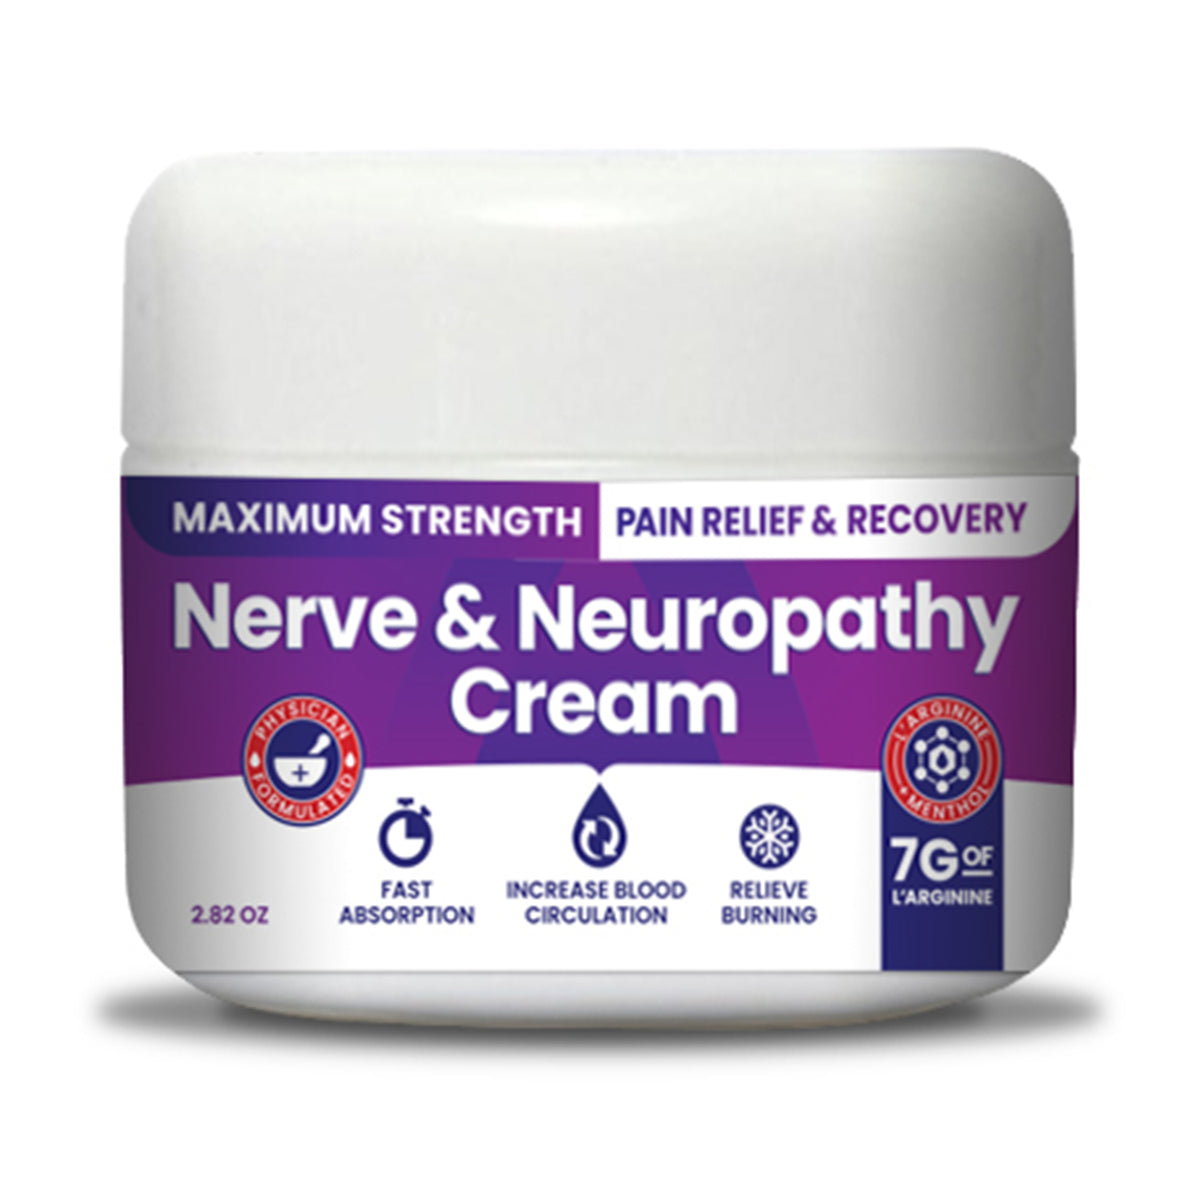 Nerve & Neuropathy Cream by NerveSpa - Maximum Strength Relief for Foot, Hands, Legs, Toes Includes 7grams of L’Arginine; Vitamin B6, Menthol, Aloe - improve blood circulation and Relieve pain -2.82oz